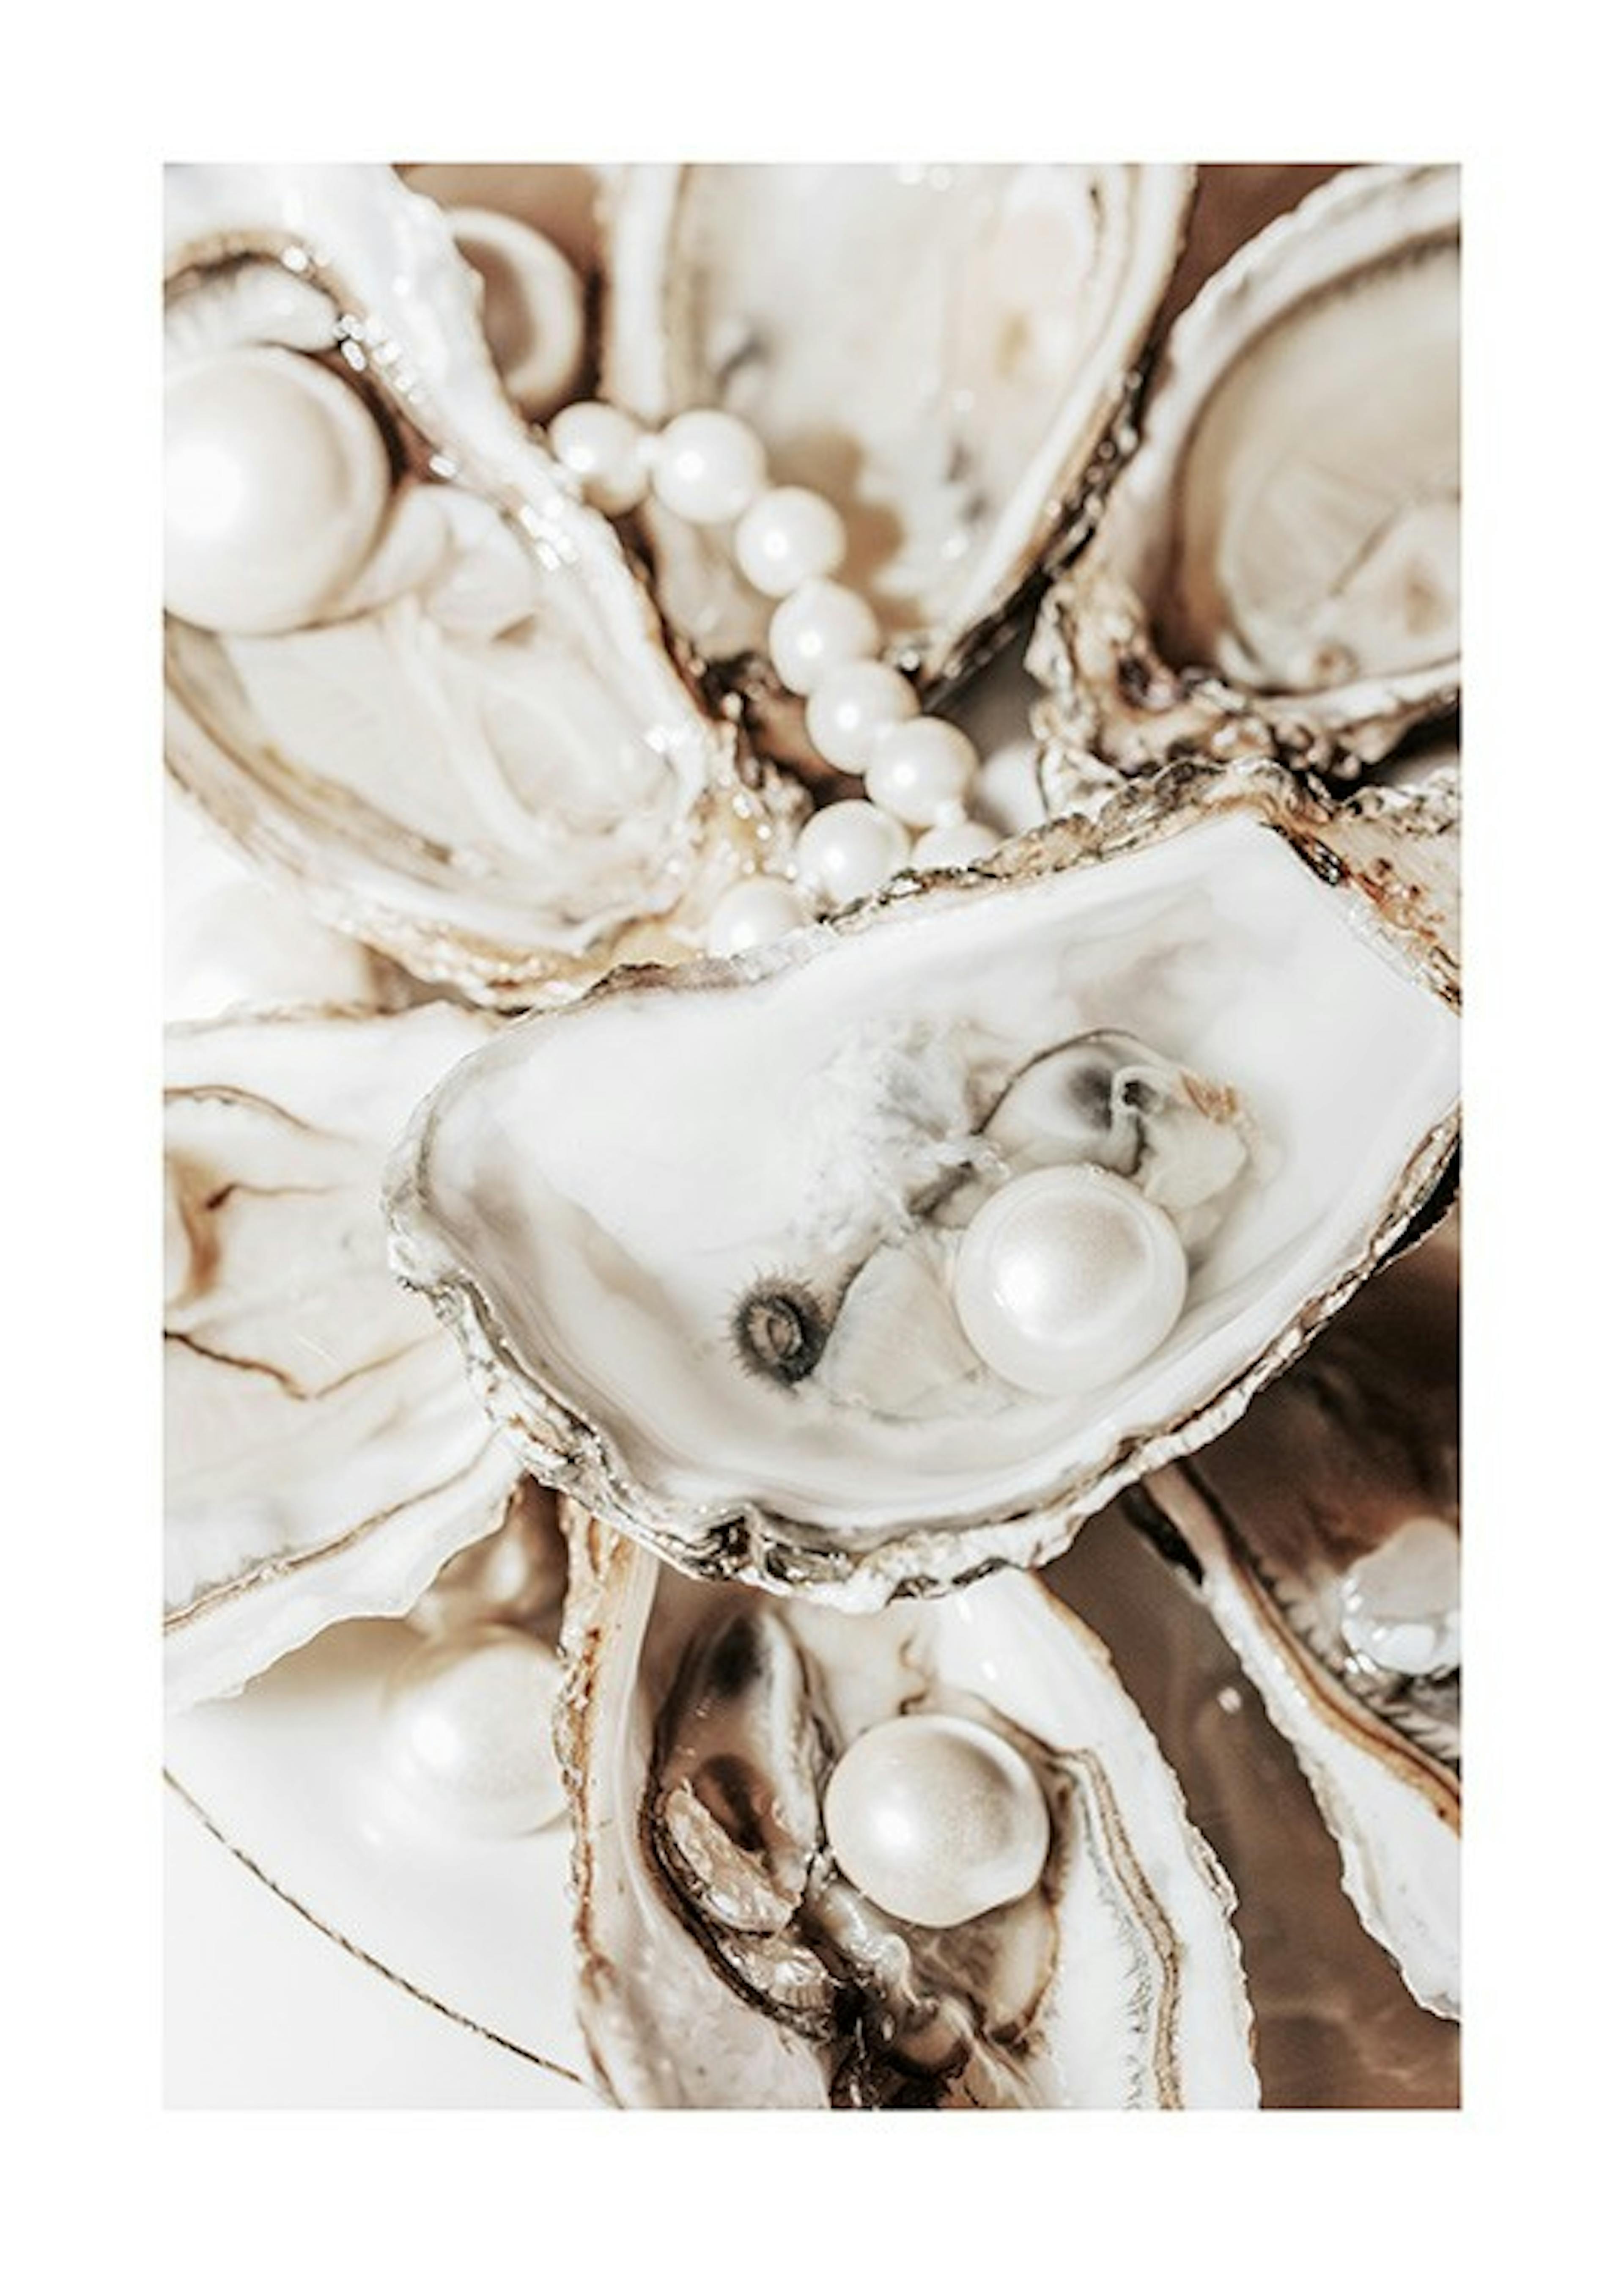 Glamorous Oysters Print